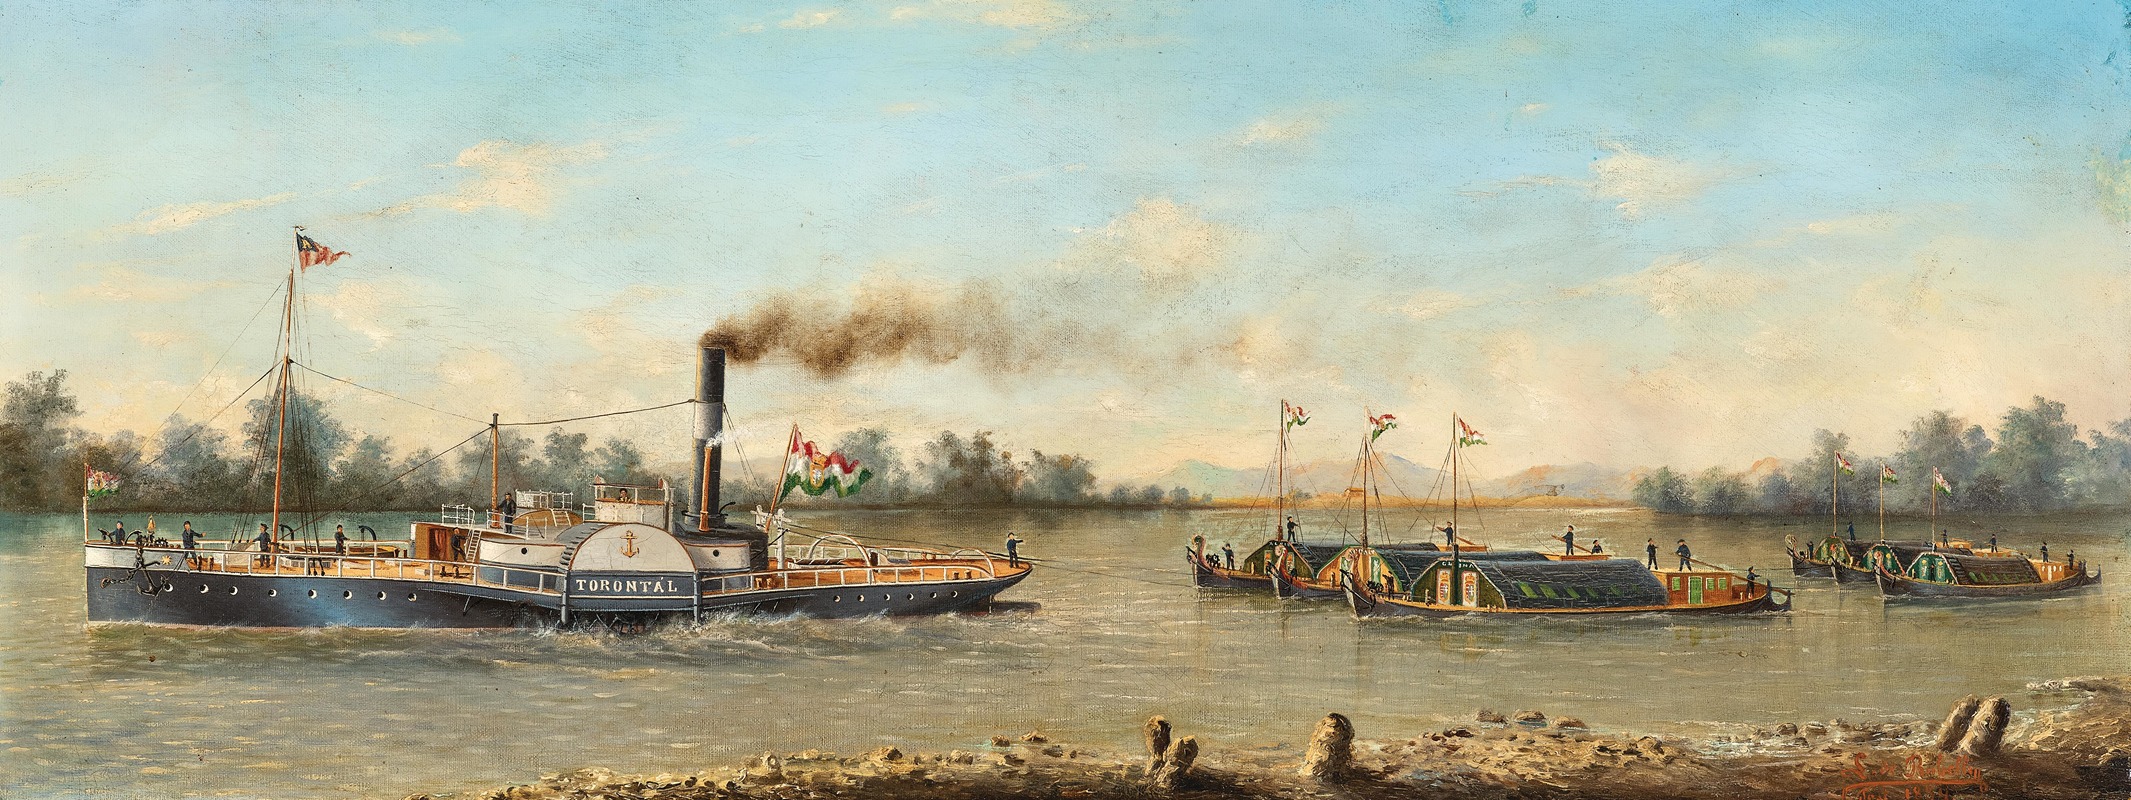 Ludwig Rubelli von Sturmfest - Tugboat TORONTÁL with Ships and Barges on a Southern Hungarian River, probably the Danube